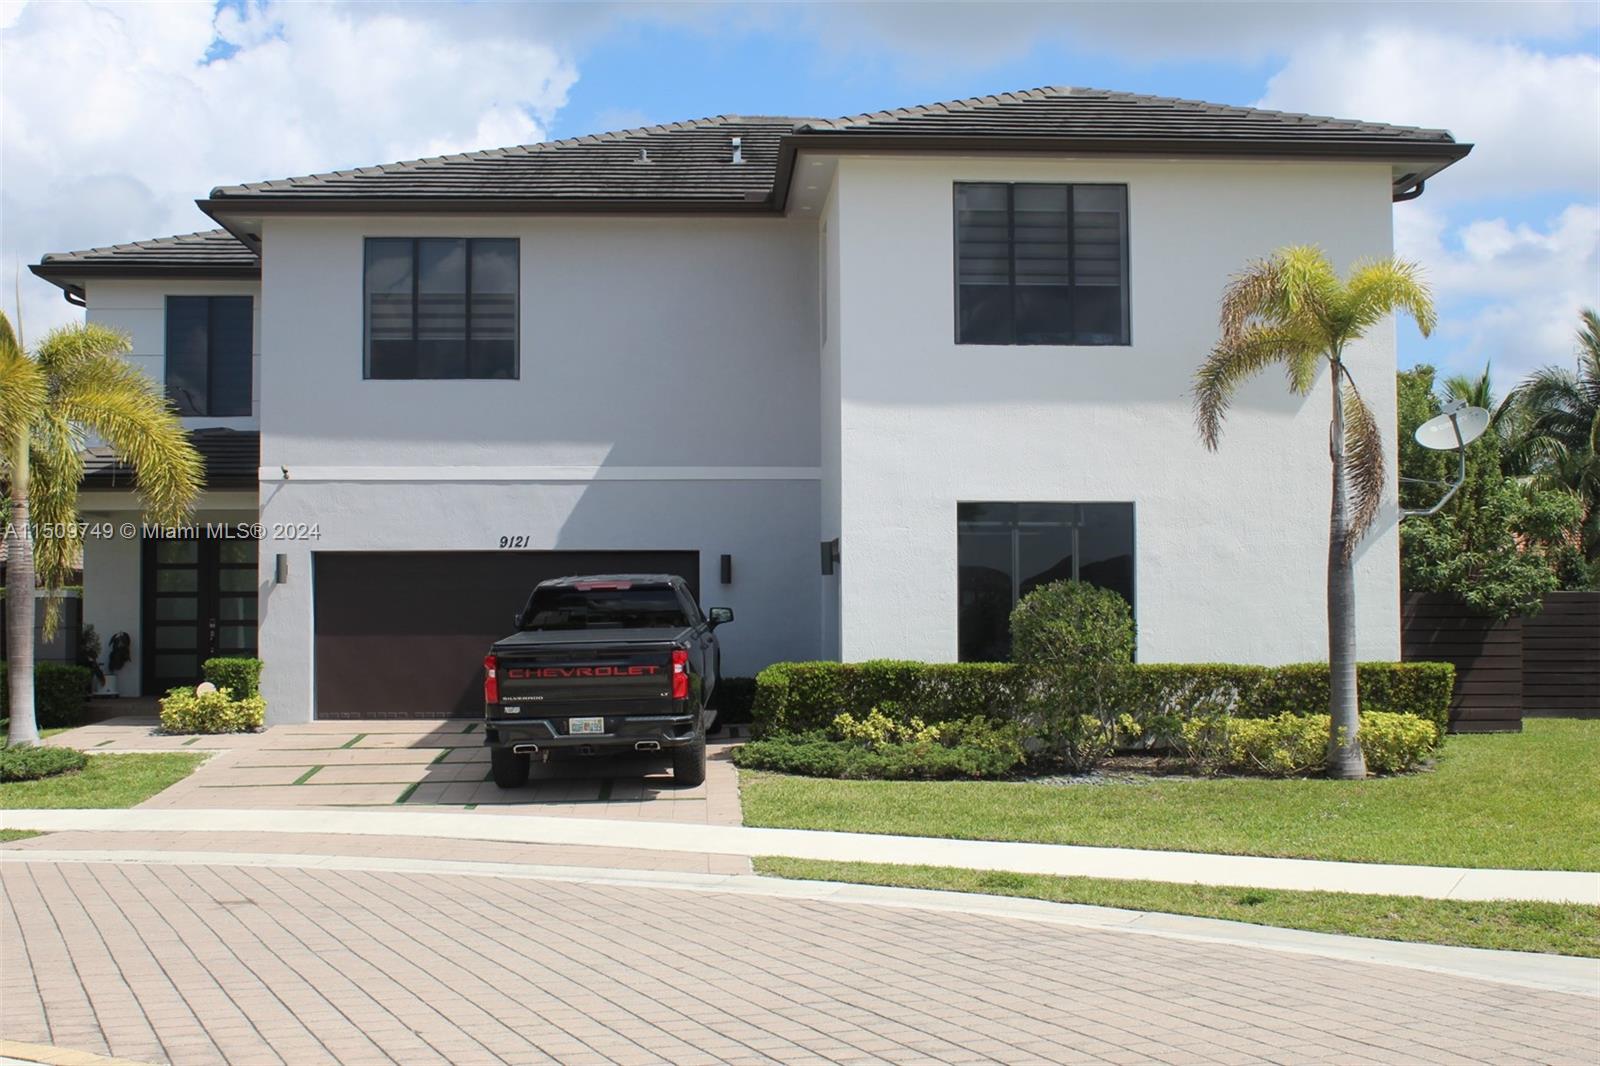 Property for Sale at 9121 Nw 161st Ter Ter, Miami Lakes, Miami-Dade County, Florida - Bedrooms: 5 
Bathrooms: 5  - $1,250,000